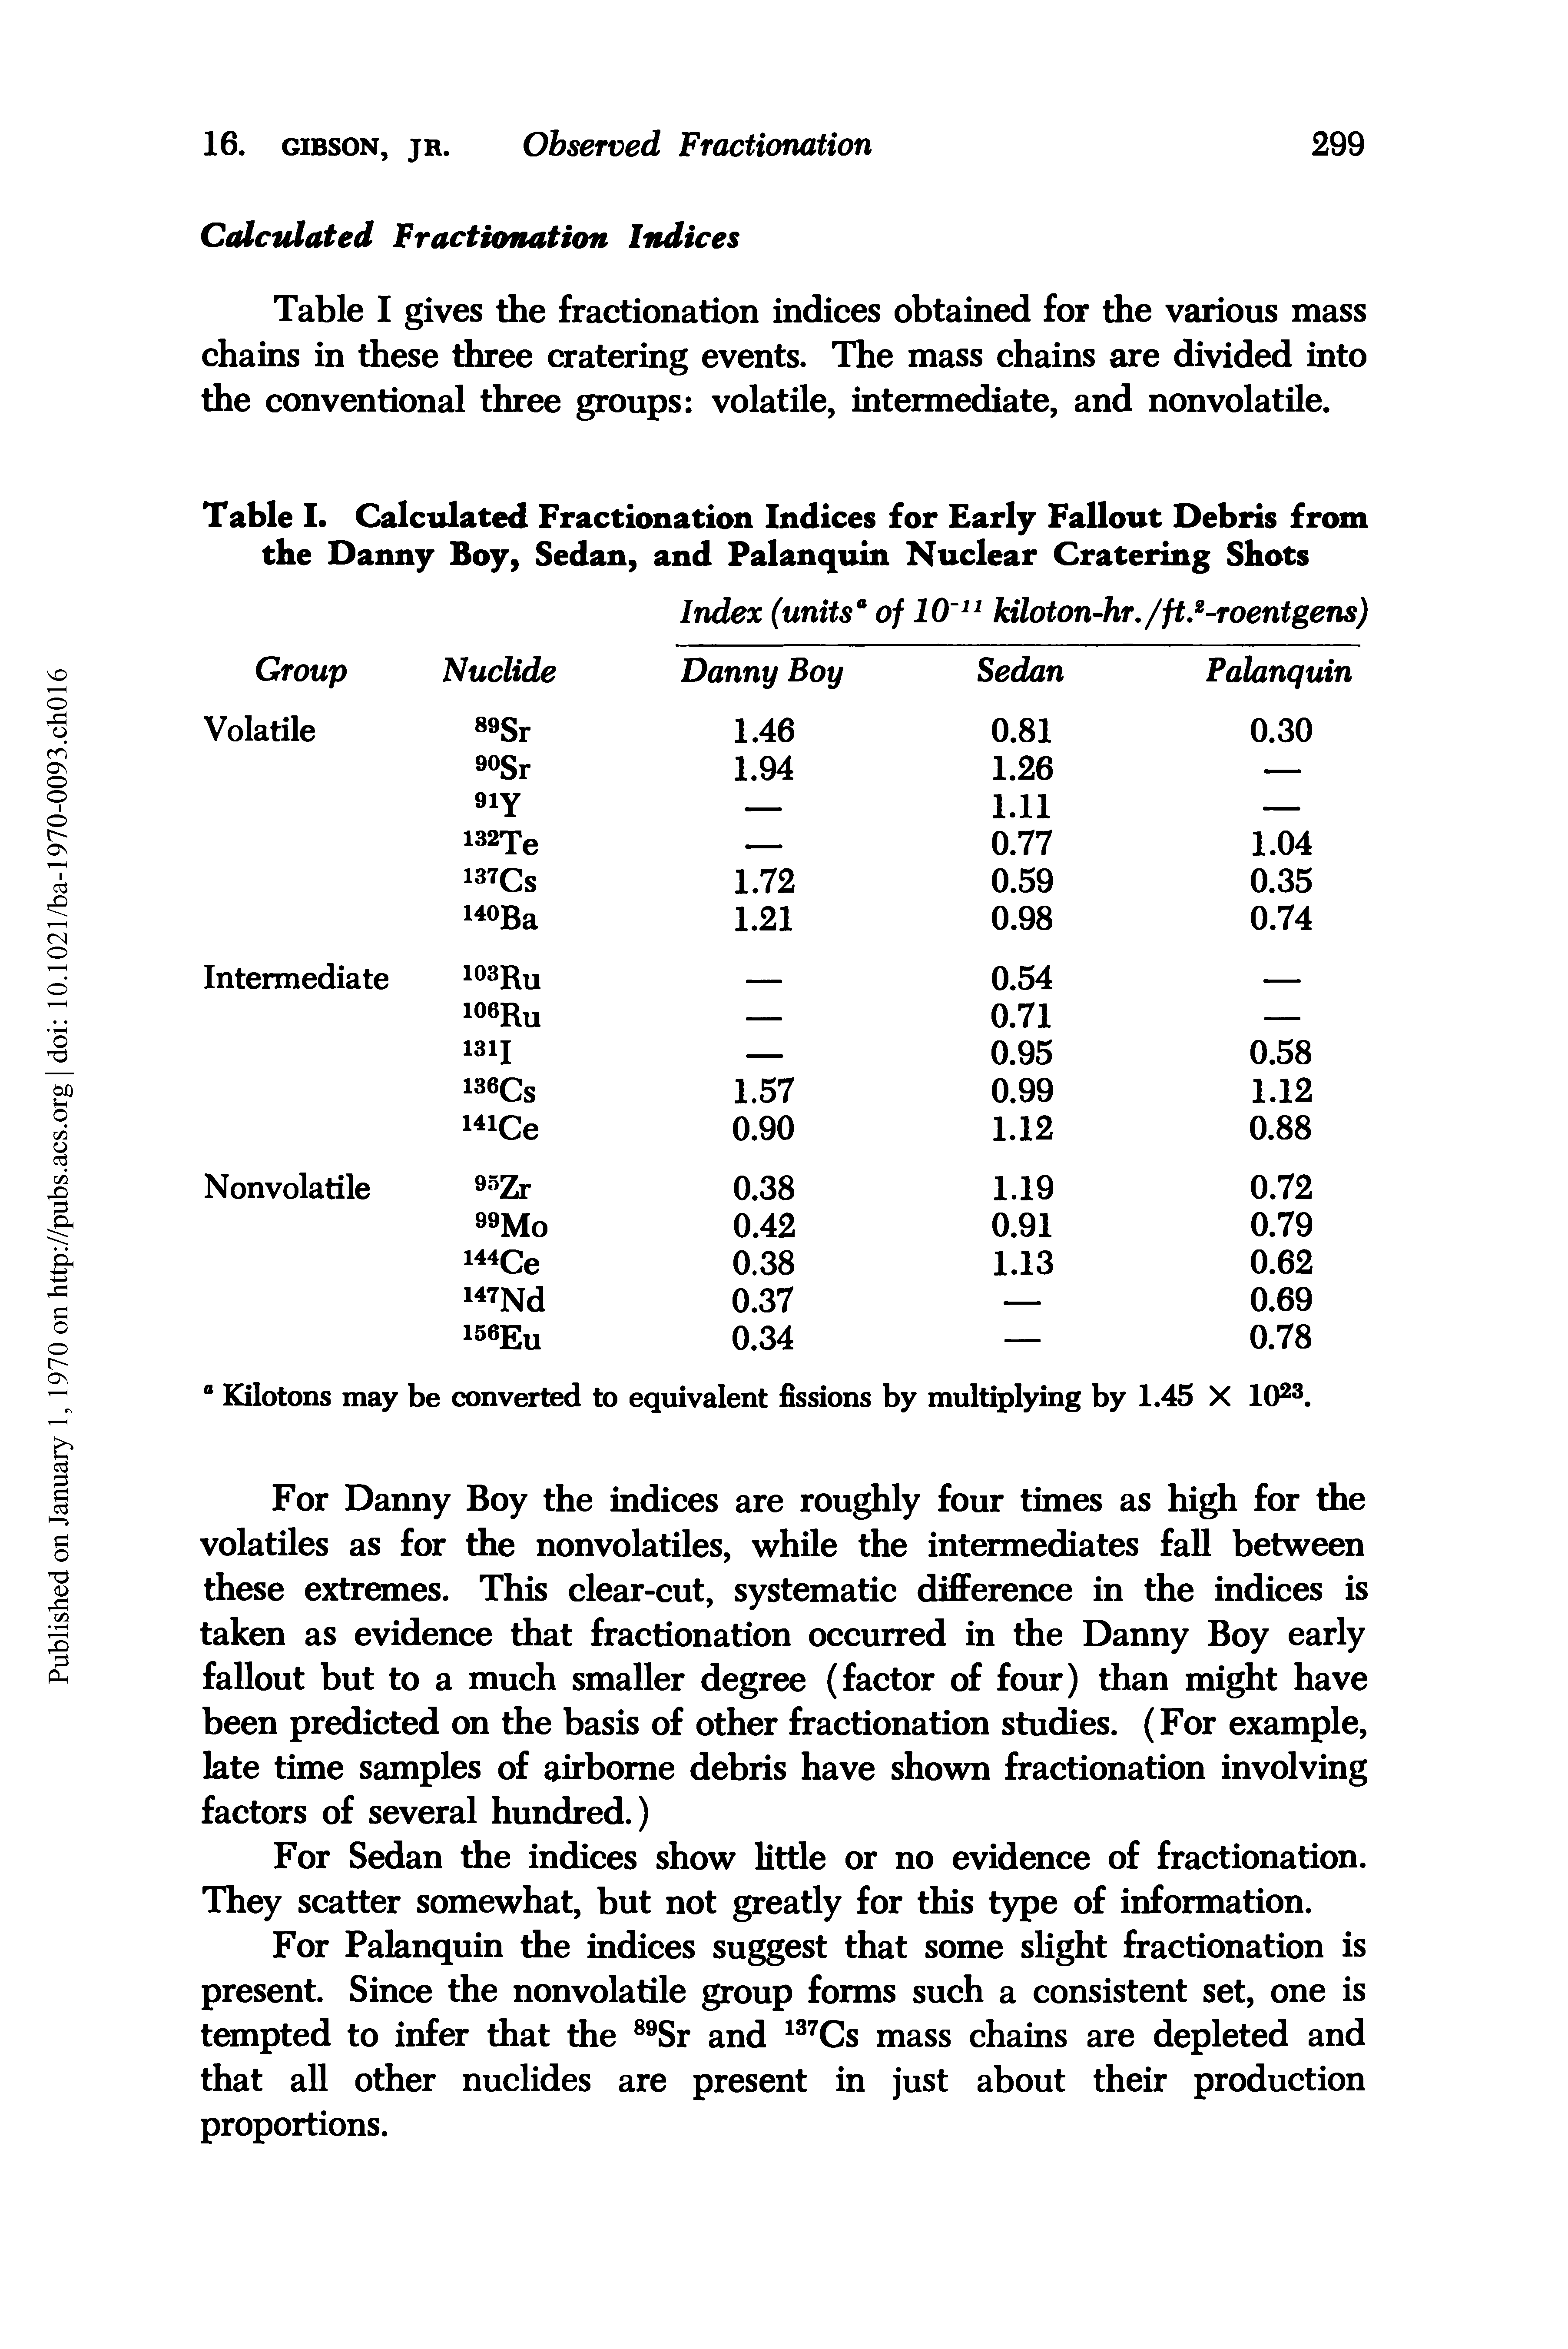 Table I. Calculated Fractionation Indices for Early Fallout Debris from the Danny Boy, Sedan, and Palanquin Nuclear Cratering Shots...